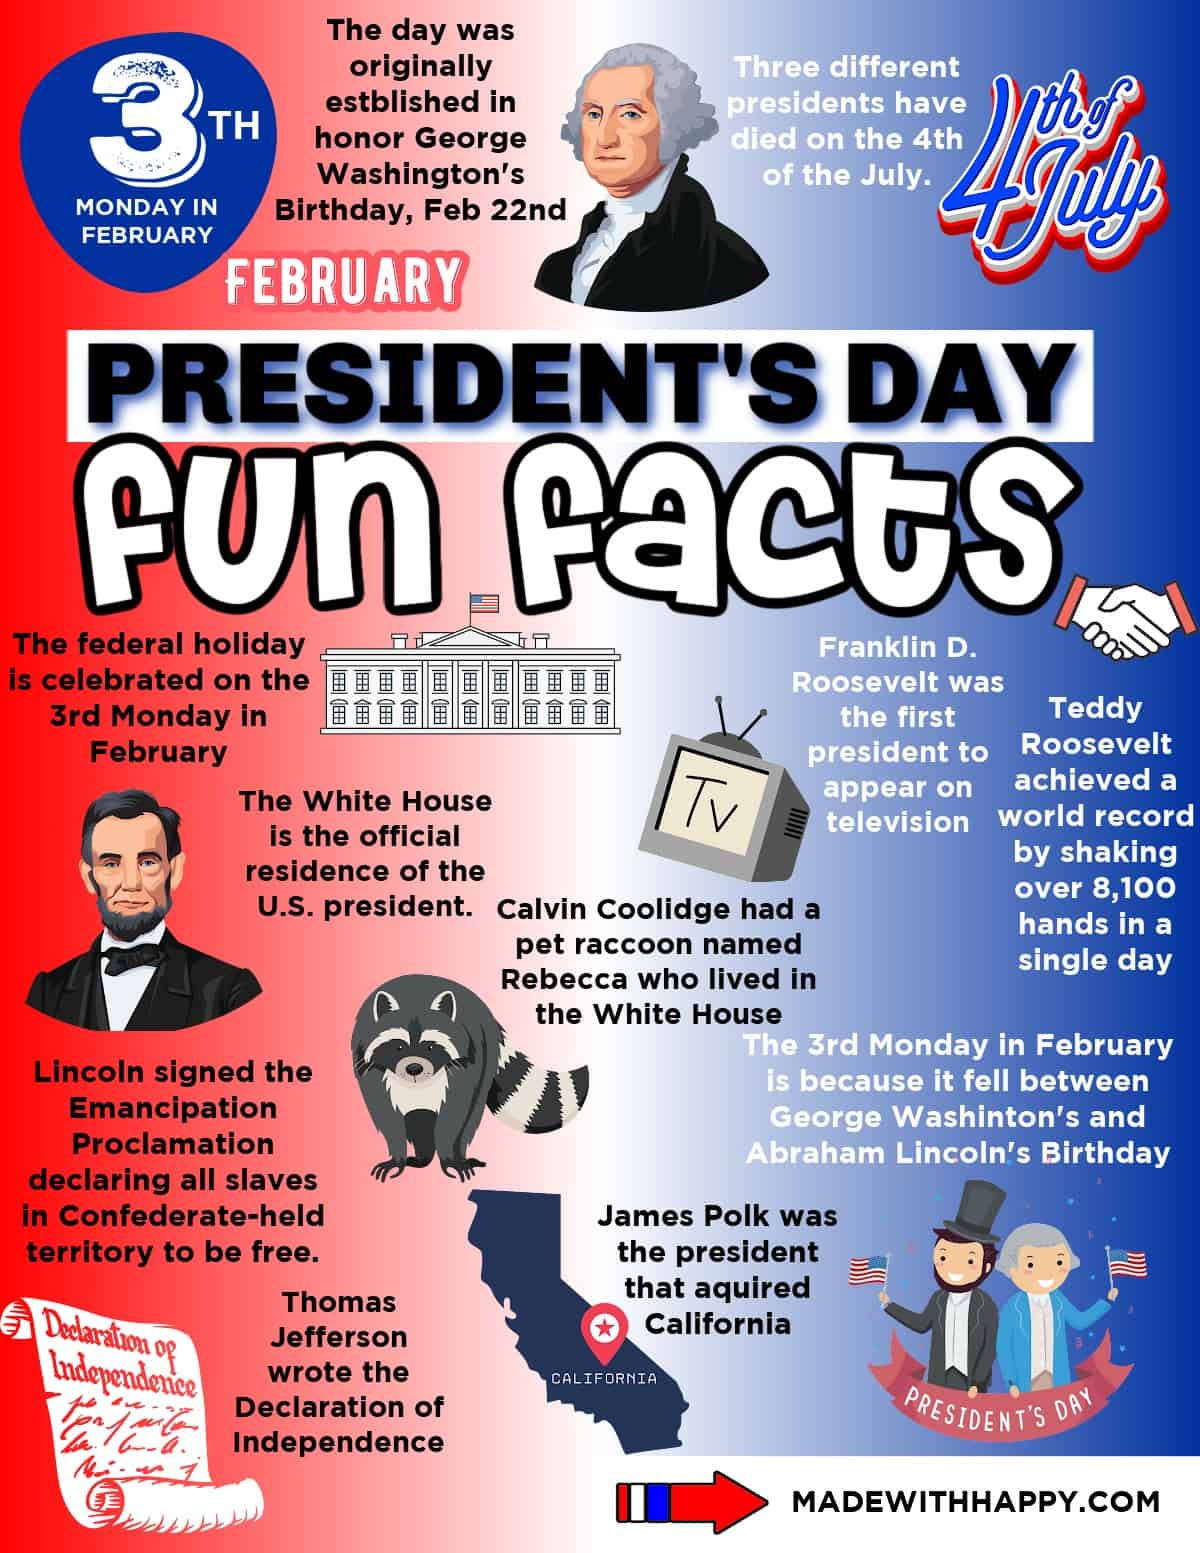 Facts About Presidents Day